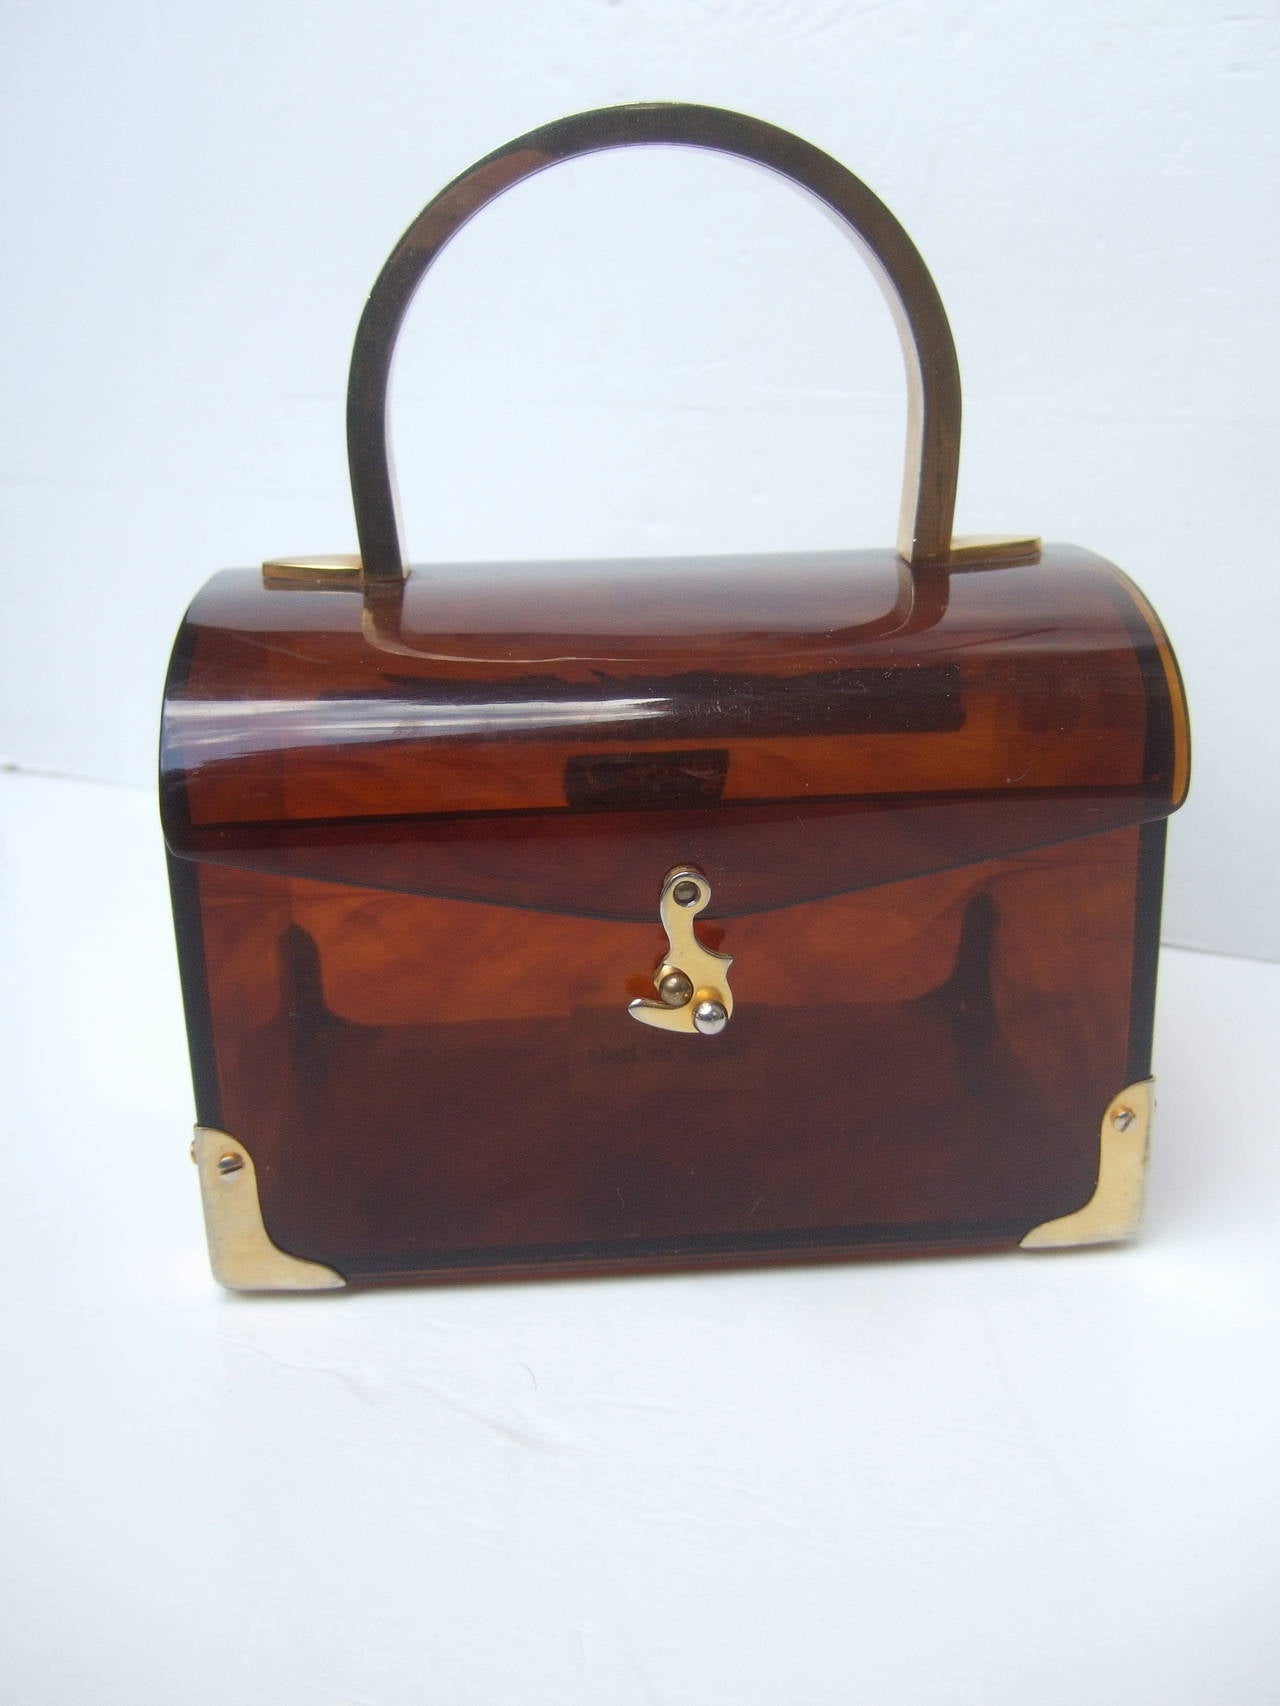 Colbentz Original stylish lucite tortoise shell handbag Made in Italy
The chic box style handbag is accented with a gilt metal handle & hardware
The posh Italian handbag makes an unique accessory

Labeled: Colbentz Original Made in Italy